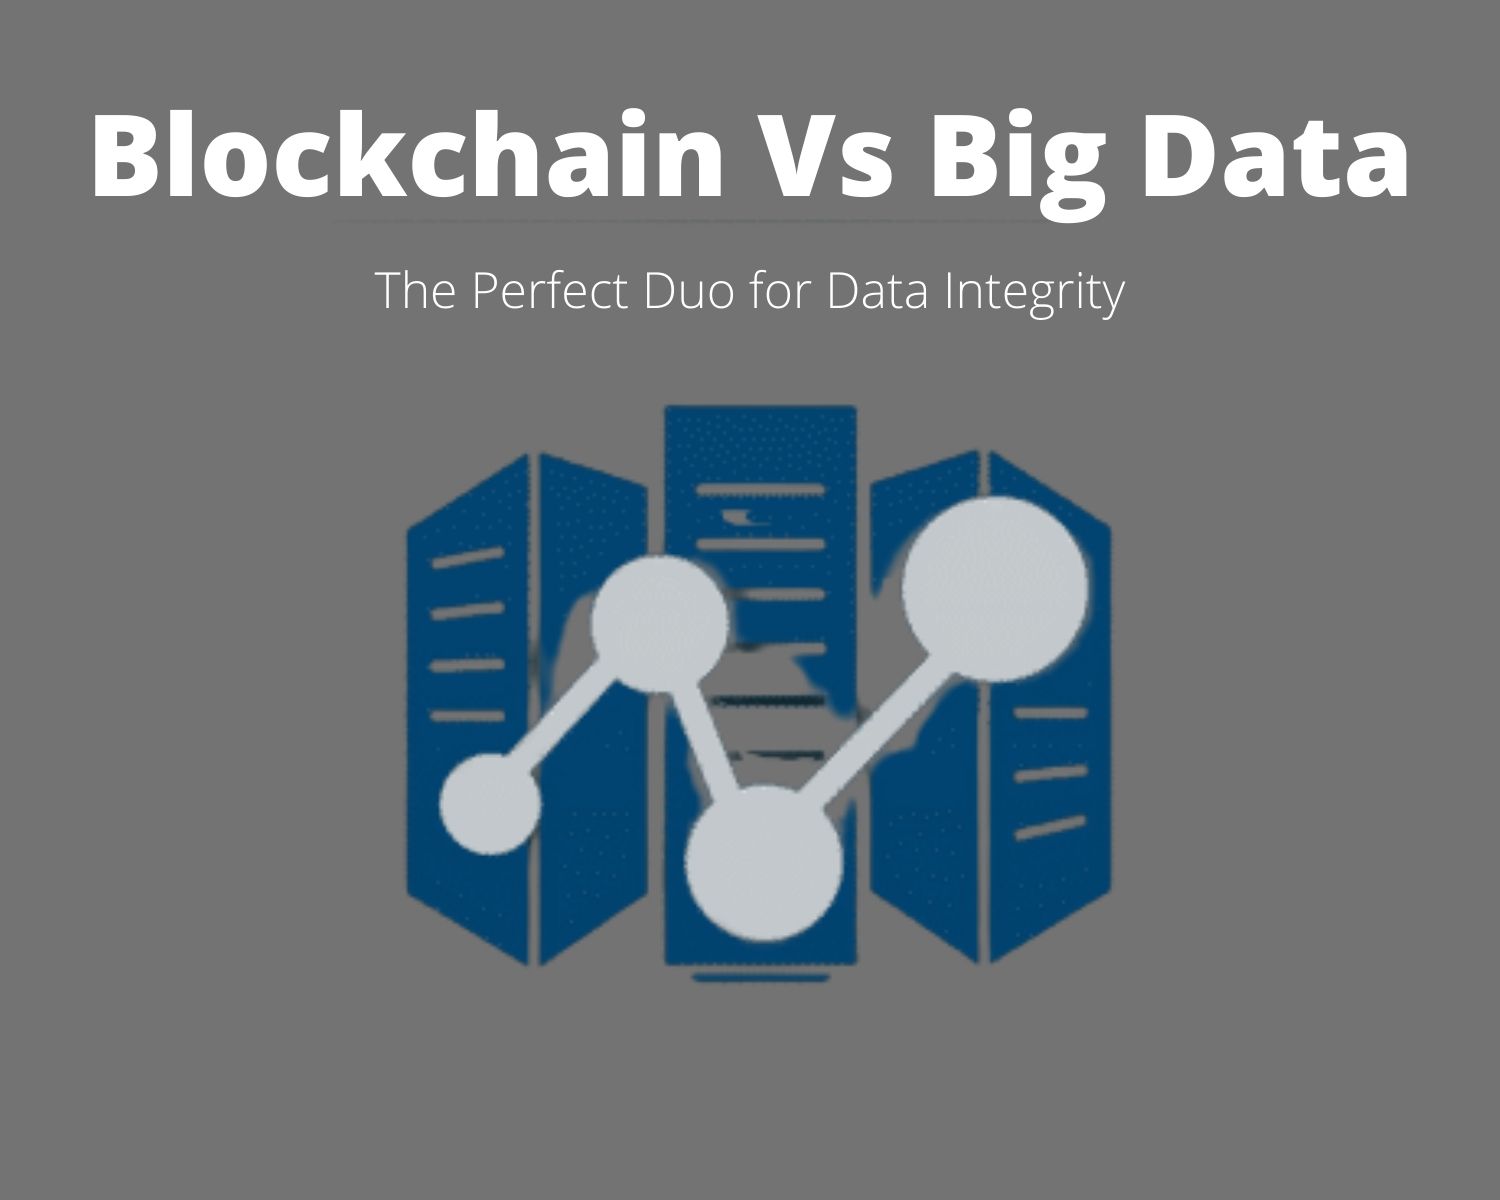 Blockchain and Big Data: The Perfect Duo for Data Integrity